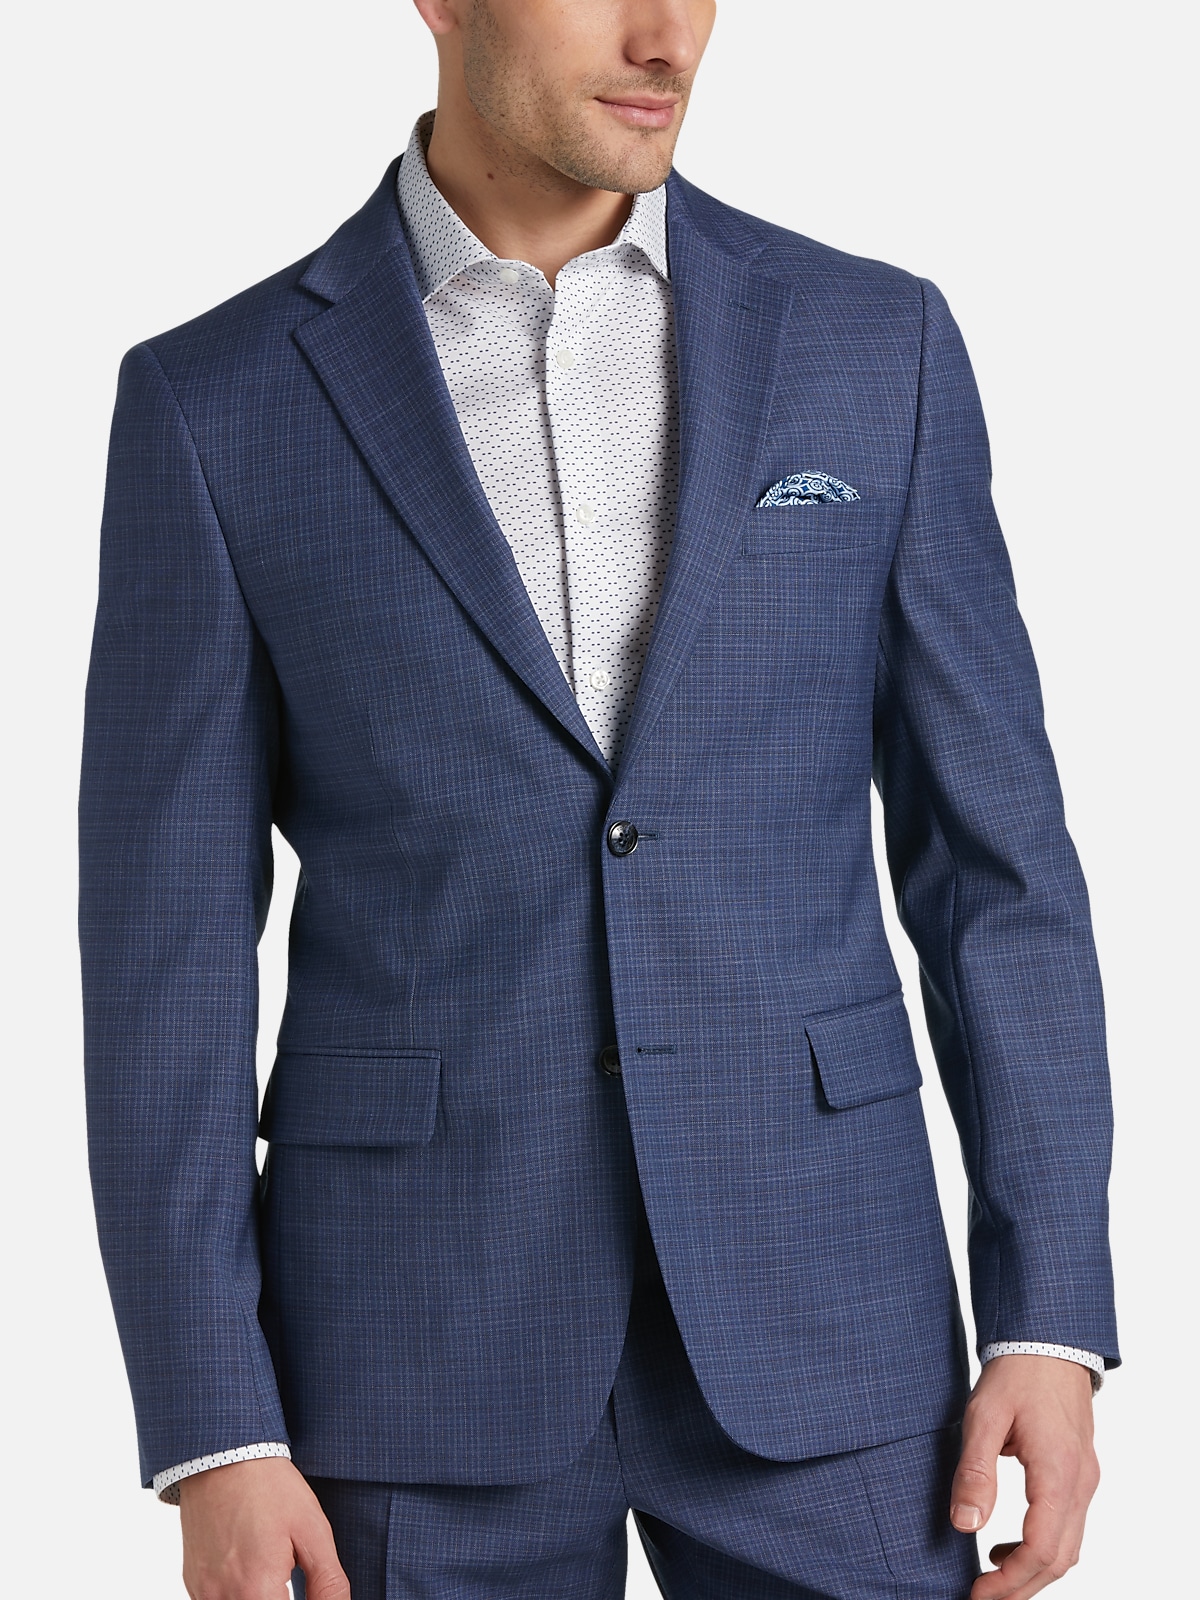 Tommy Hilfiger Modern Fit Suit Separates Coat | All Clothing| Men's ...